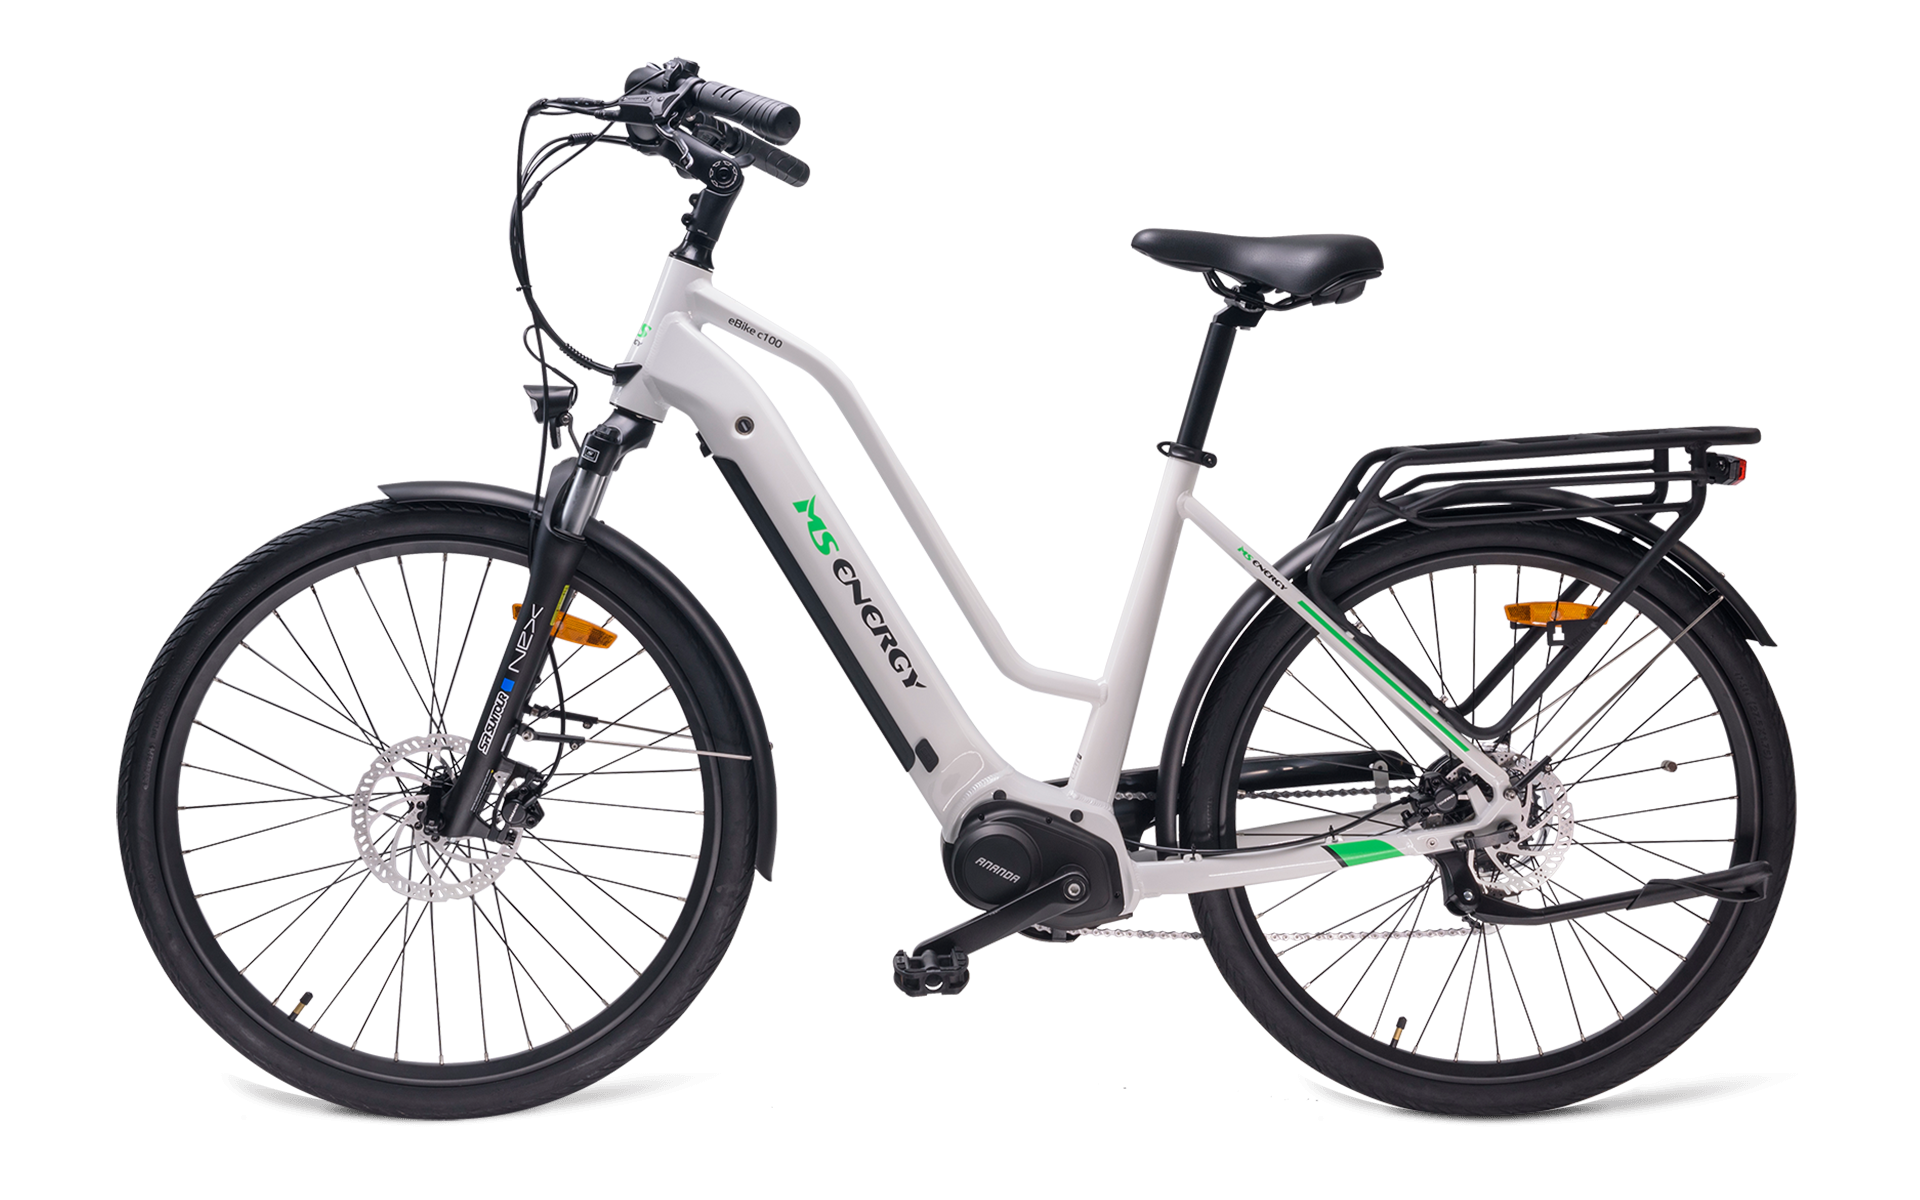 apprentice the first Easy to read MS ENERGY eBike c100 – MS Energy